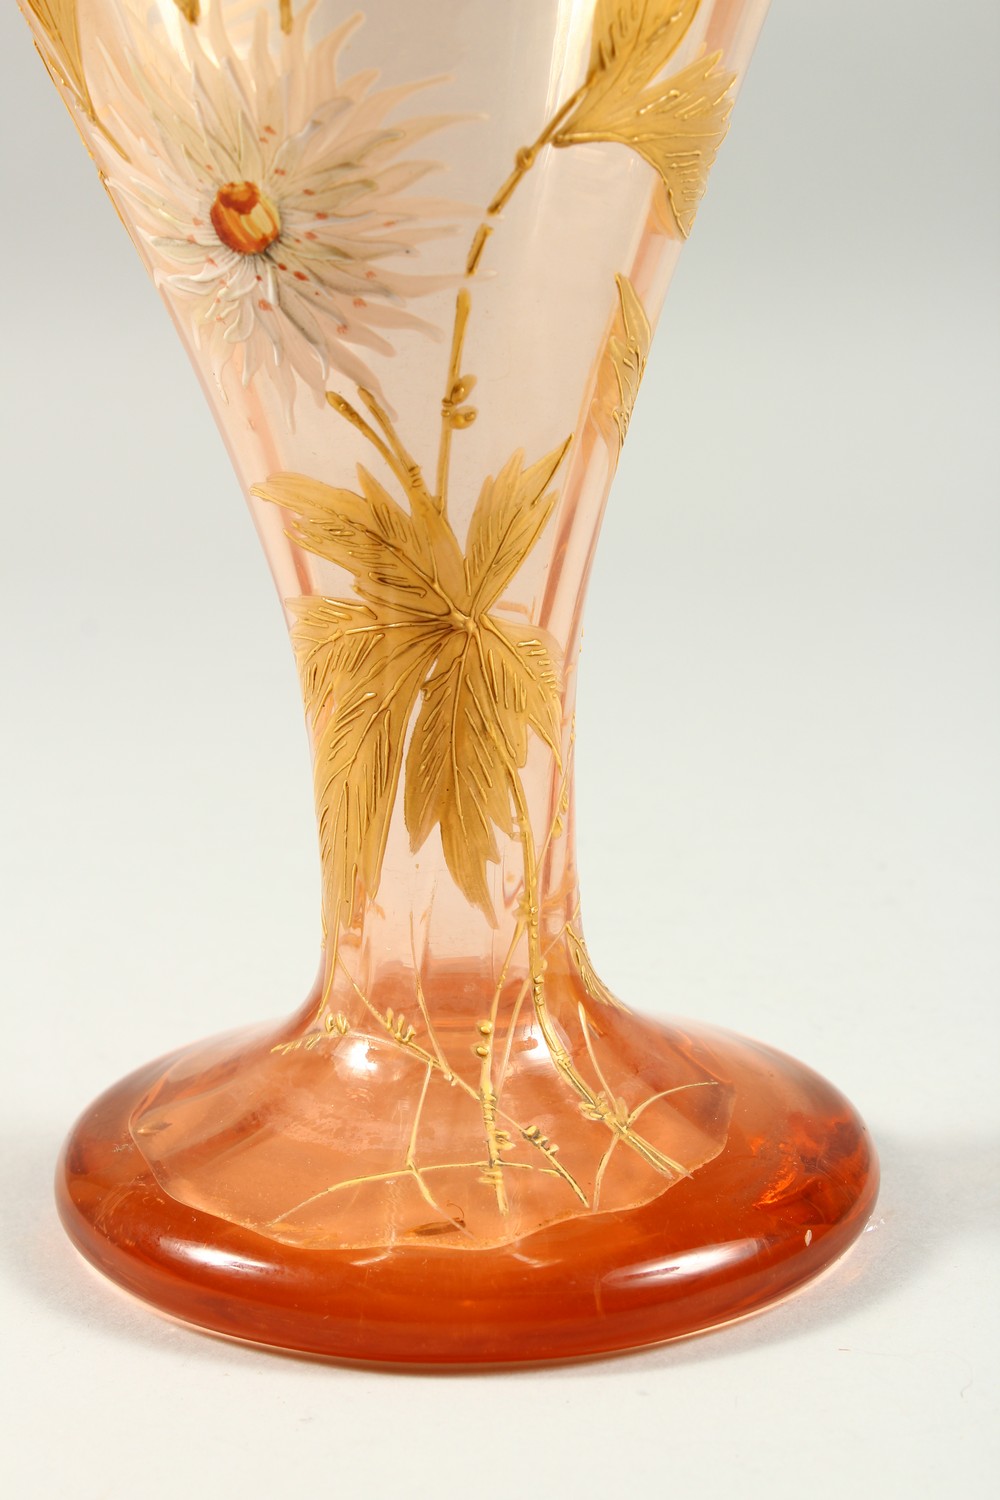 A WEBB'S TYPE BUD SHAPED PEDESTAL VASE, enamel and gilt decorated with flowers. 11.75ins high. - Image 3 of 7